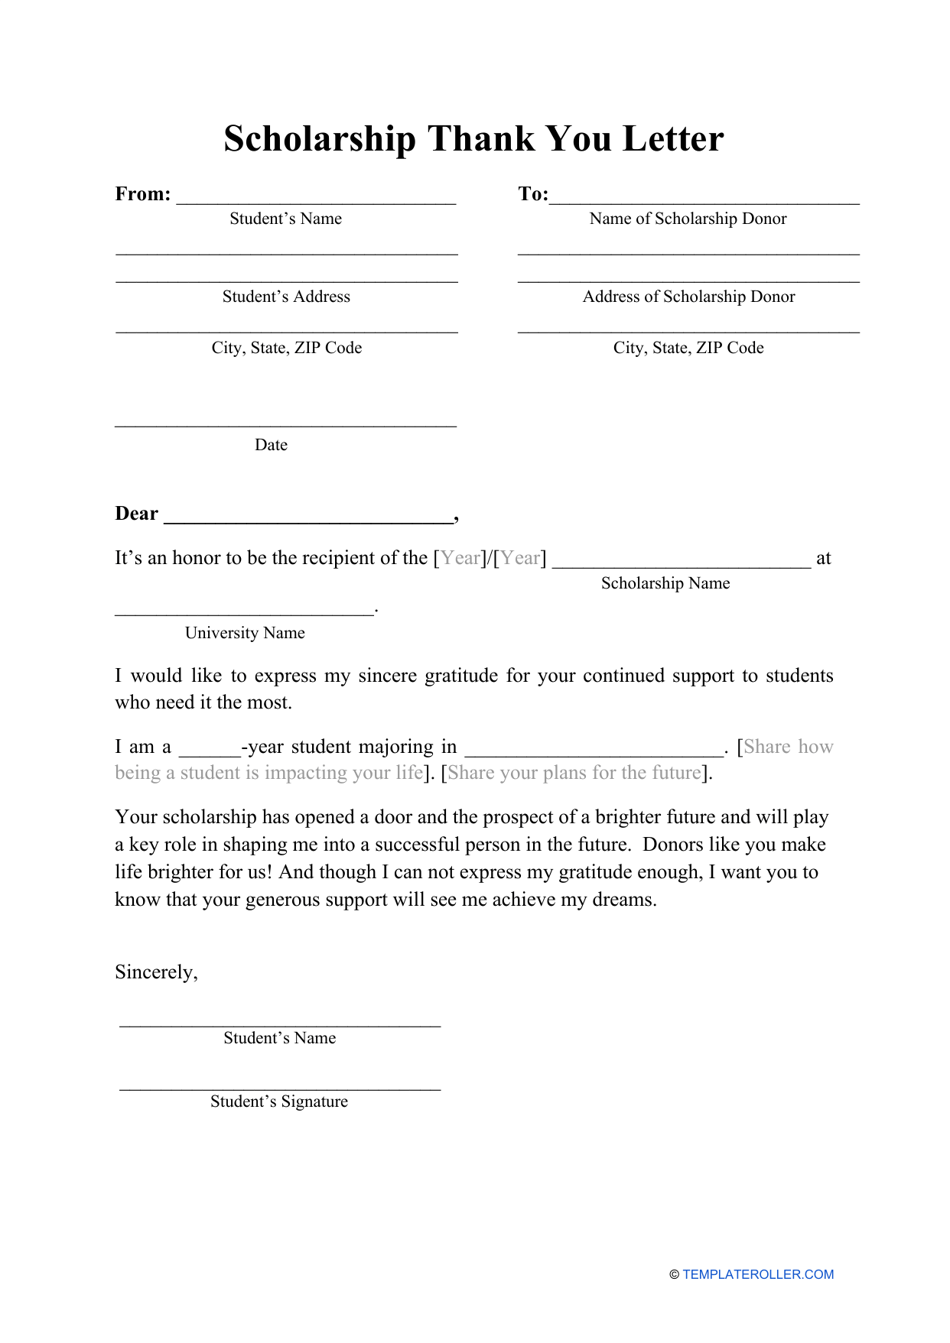 Sample Scholarship Thank You Letter Template